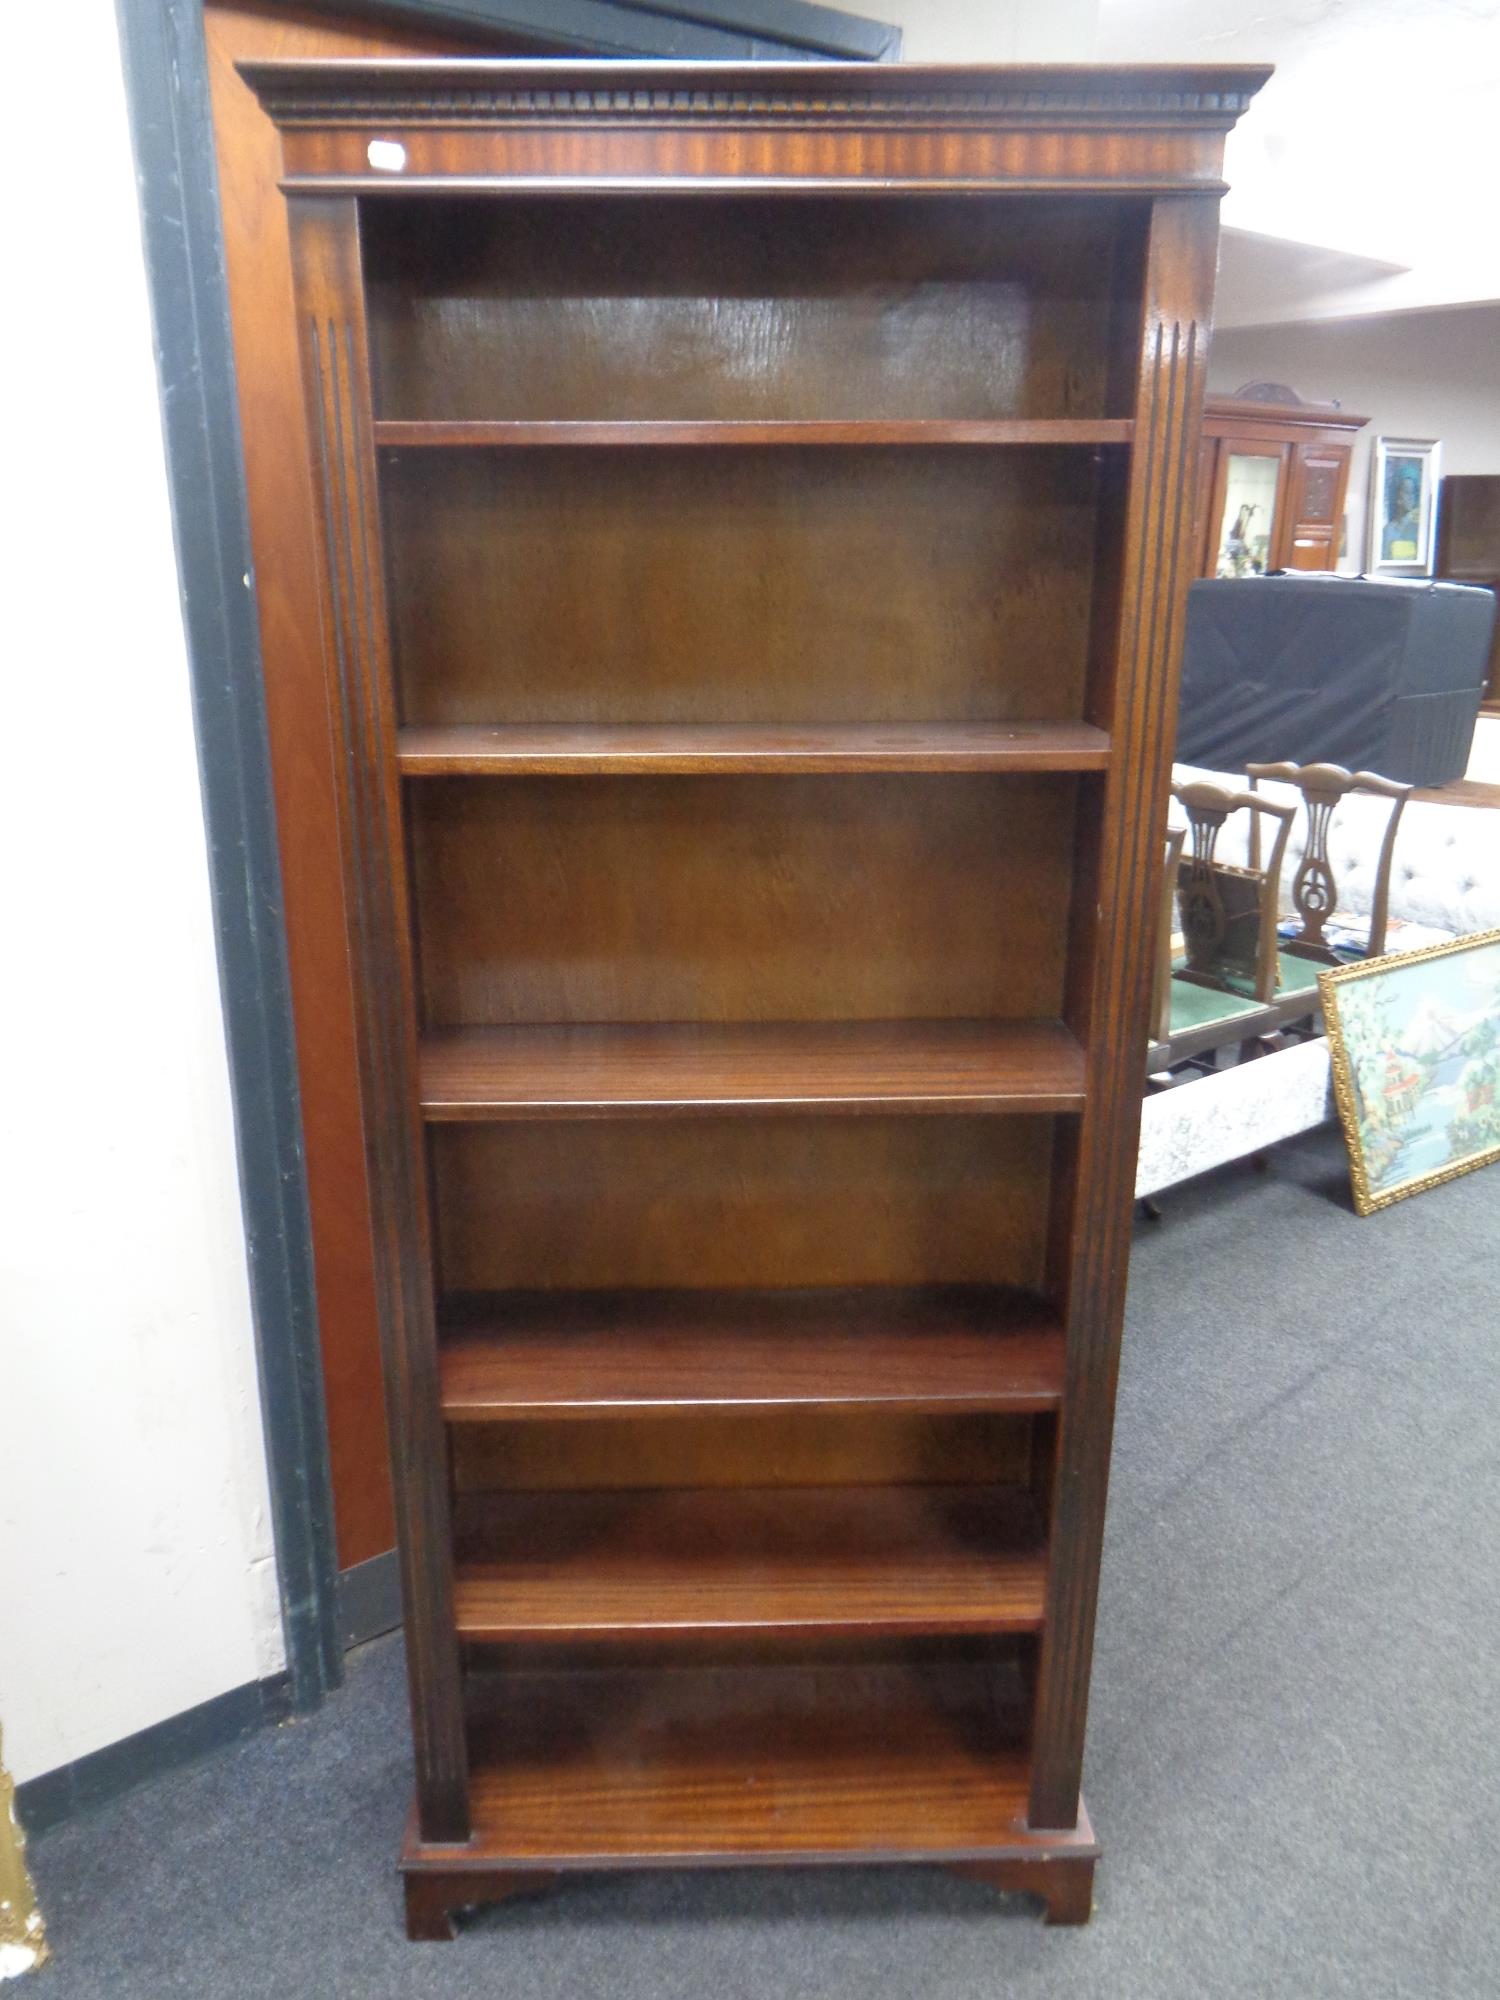 A set of open book shelves in a mahogany finish